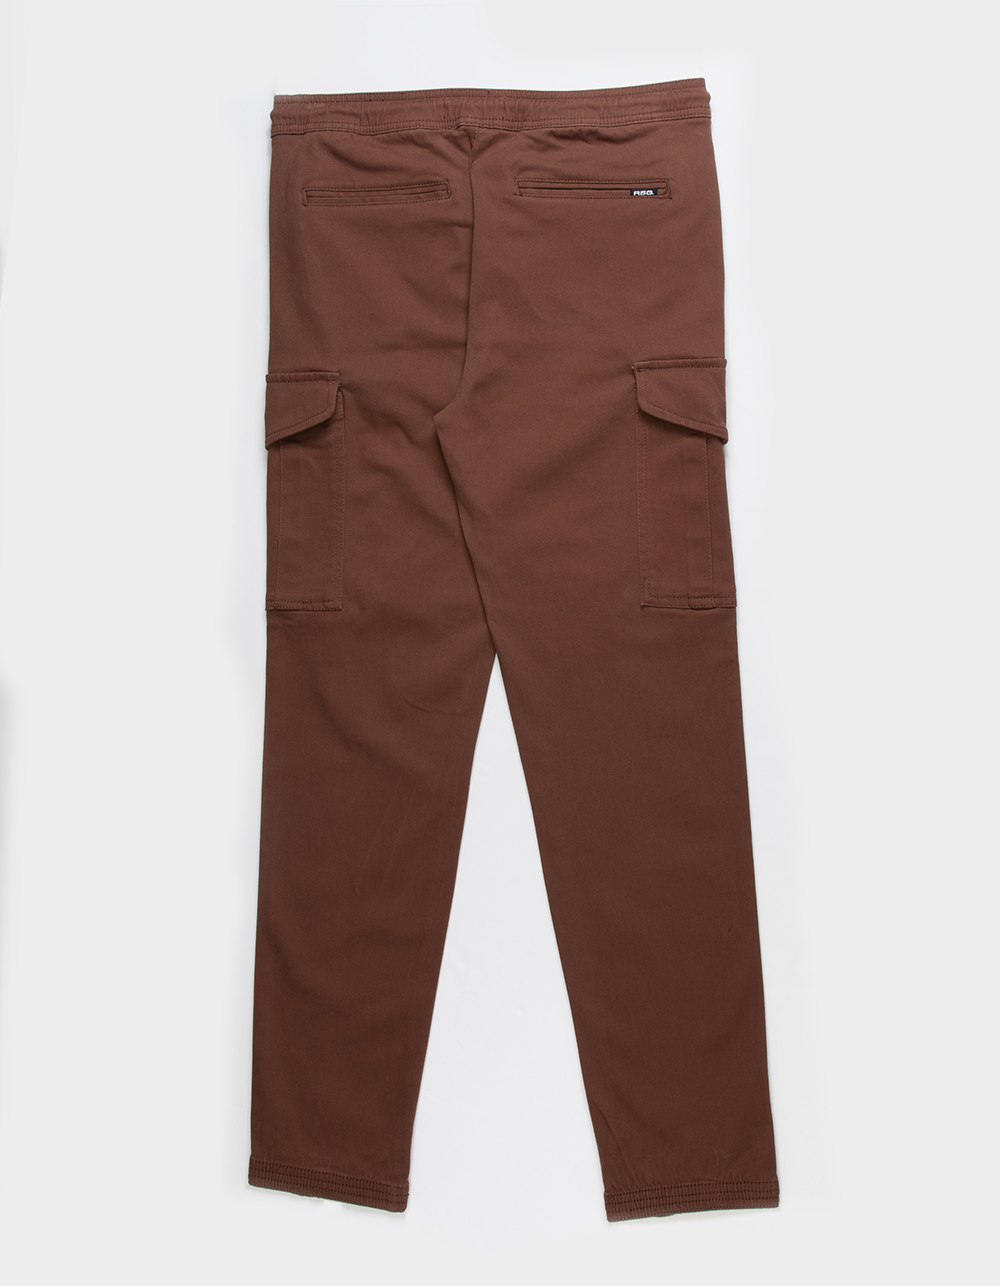 RSQ Boys Twill Cargo Jogger Pants - BROWN